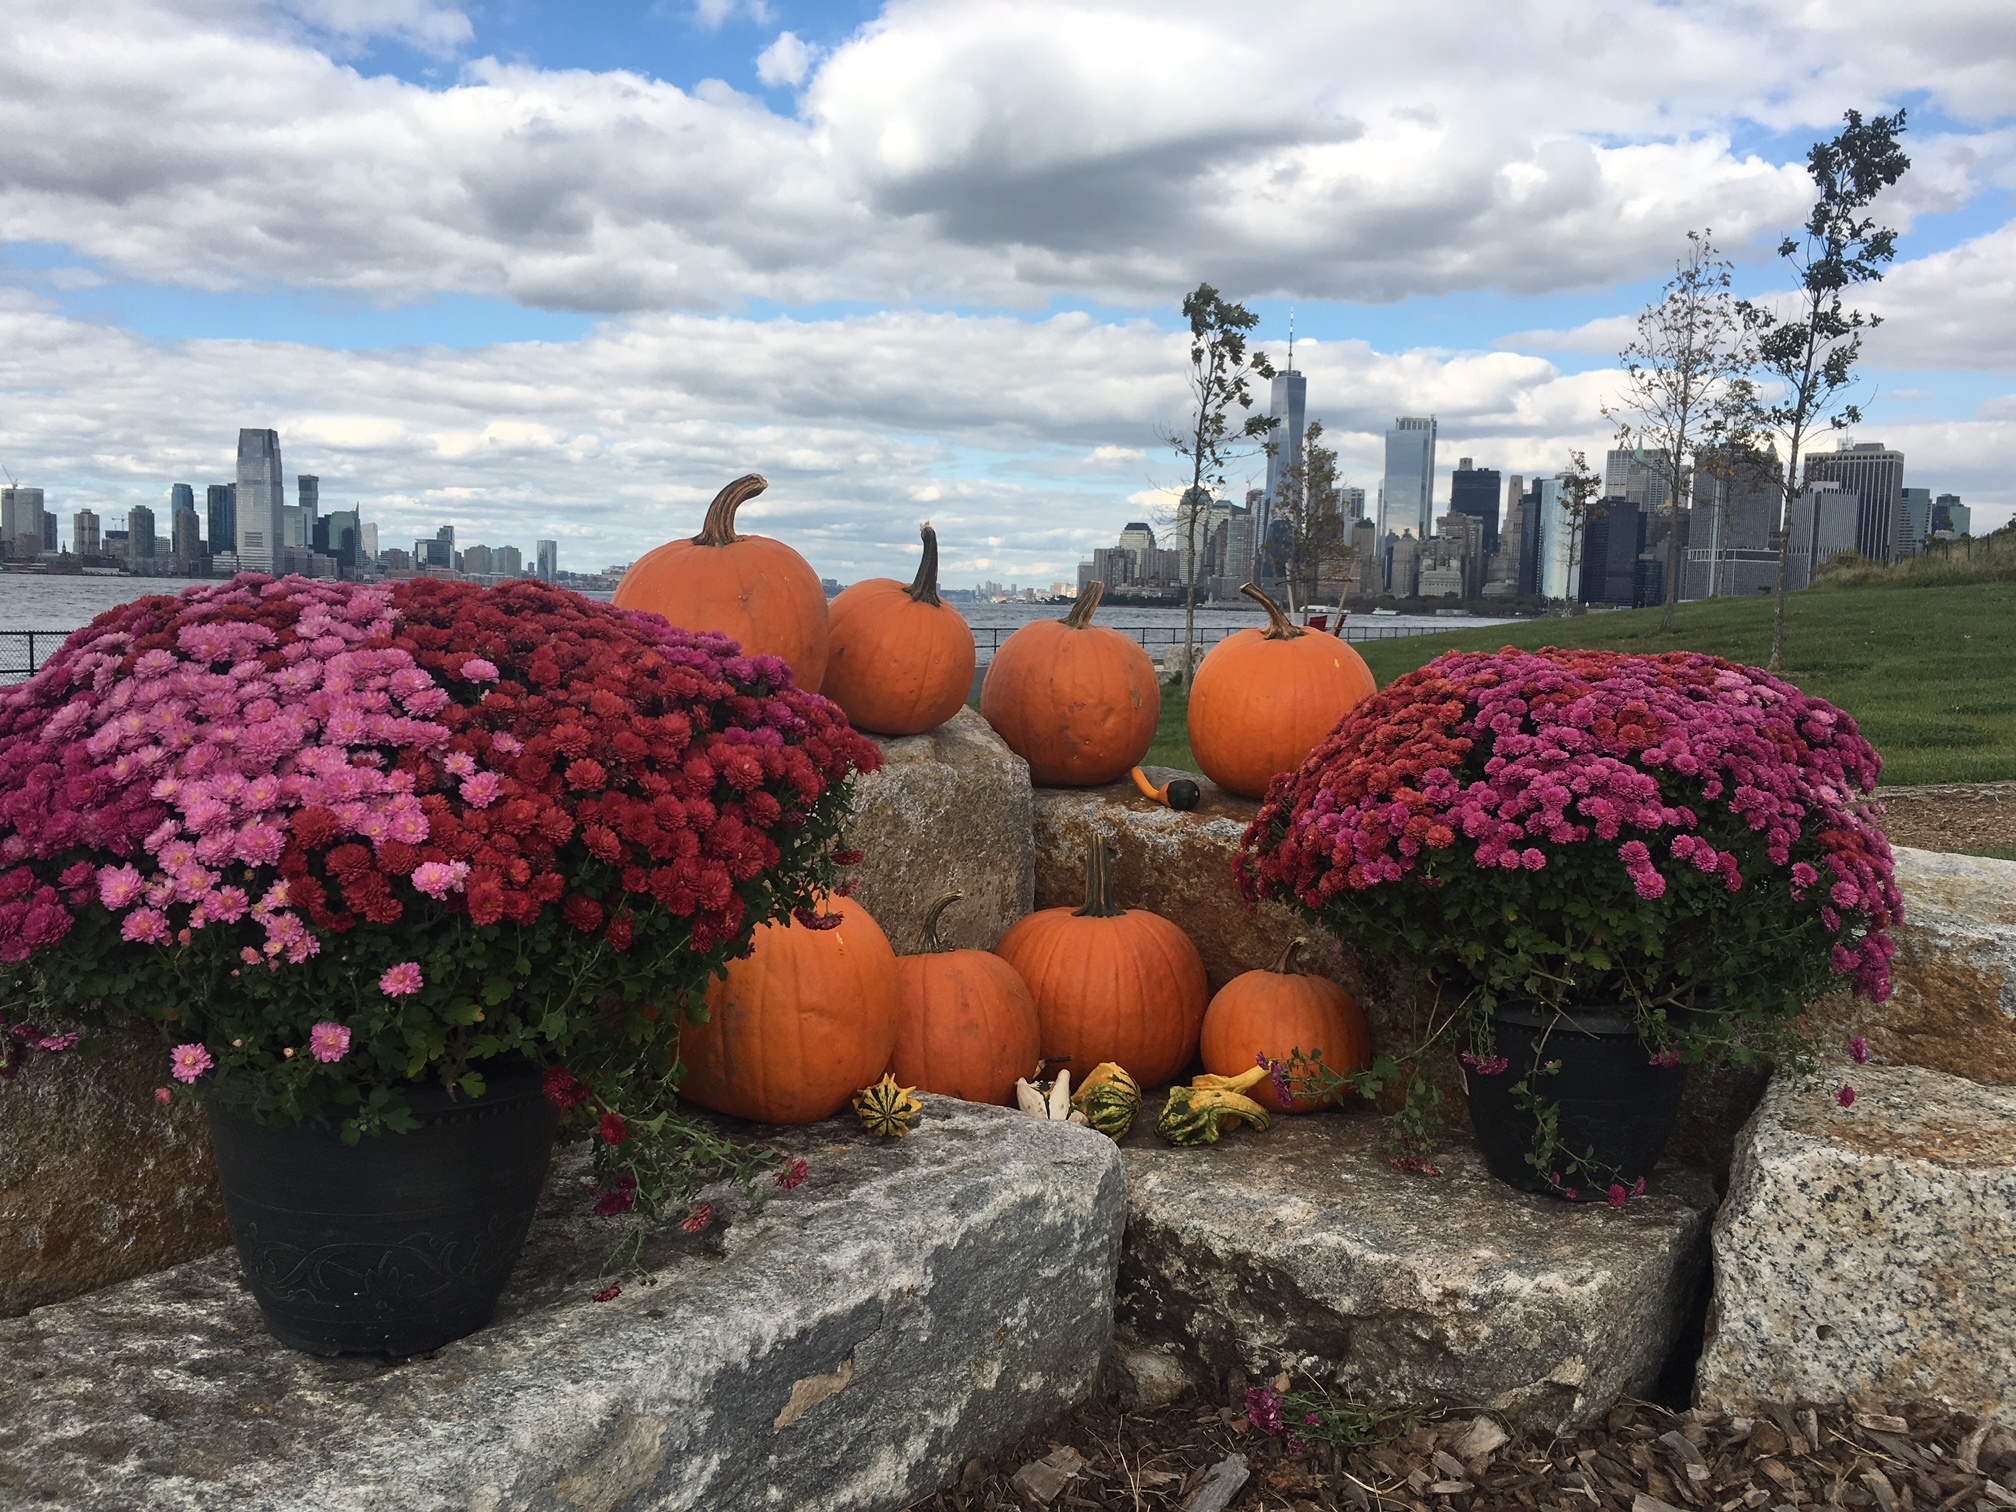 A fullblown pumpkin patch is coming to Governors Island this month